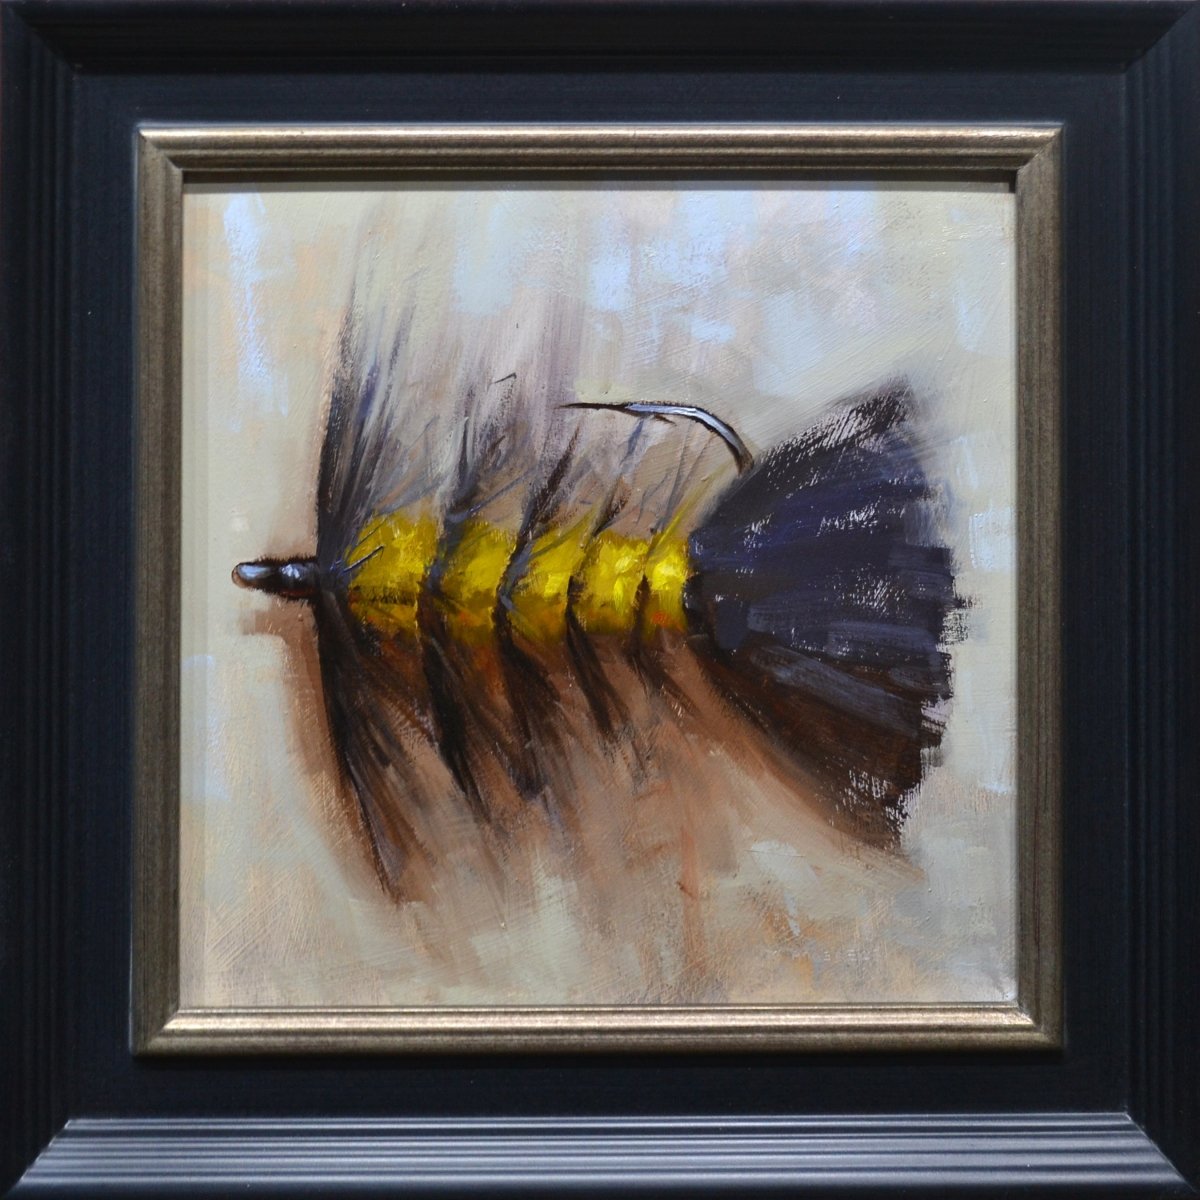 Black Olive Wooly Bugger by Marc Anderson at LePrince Galleries